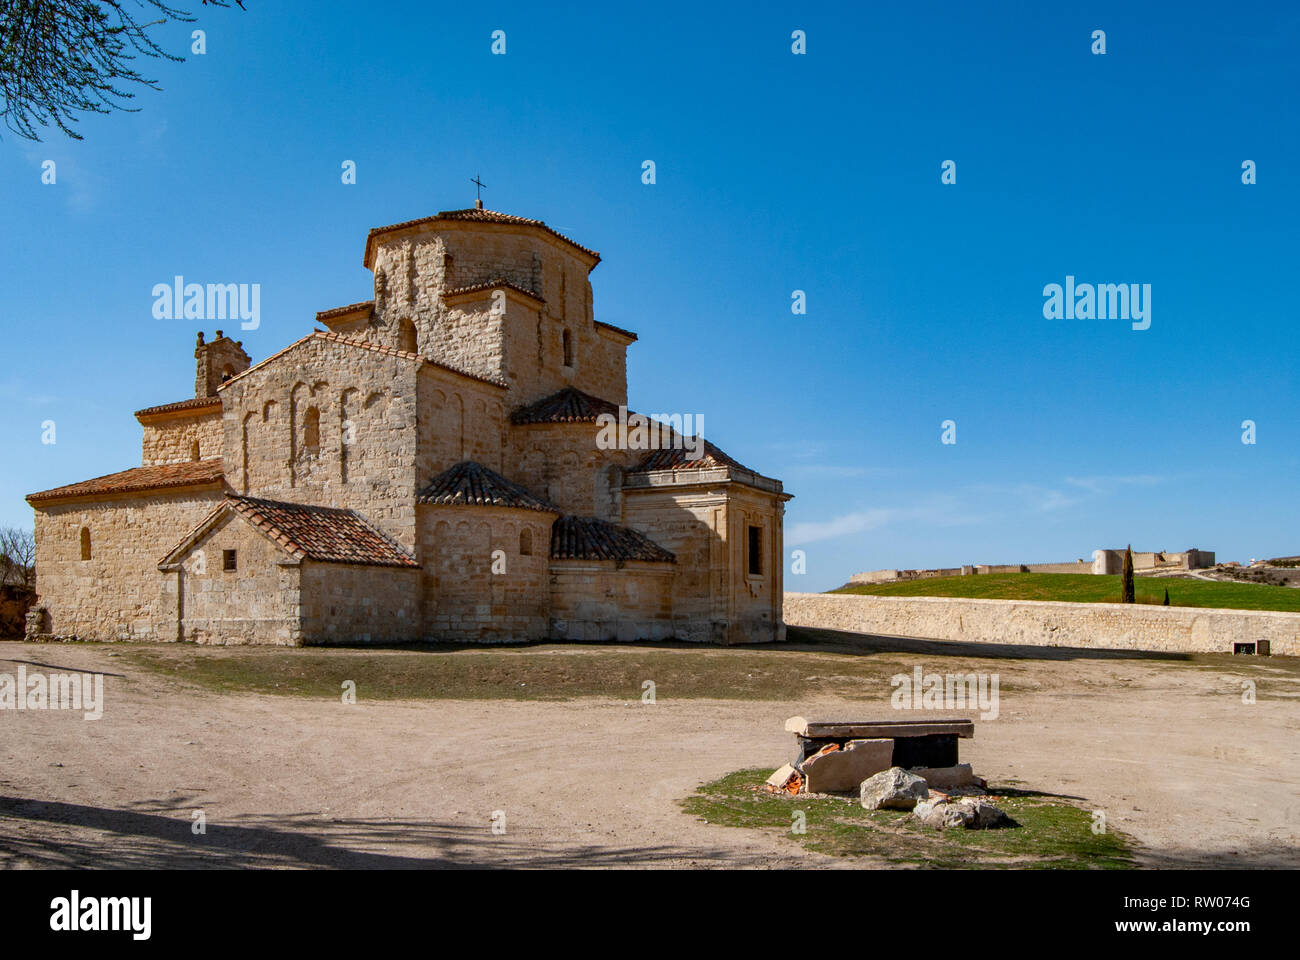 Ancient Ur High Resolution Stock Photography and Images - Page 8 - Alamy